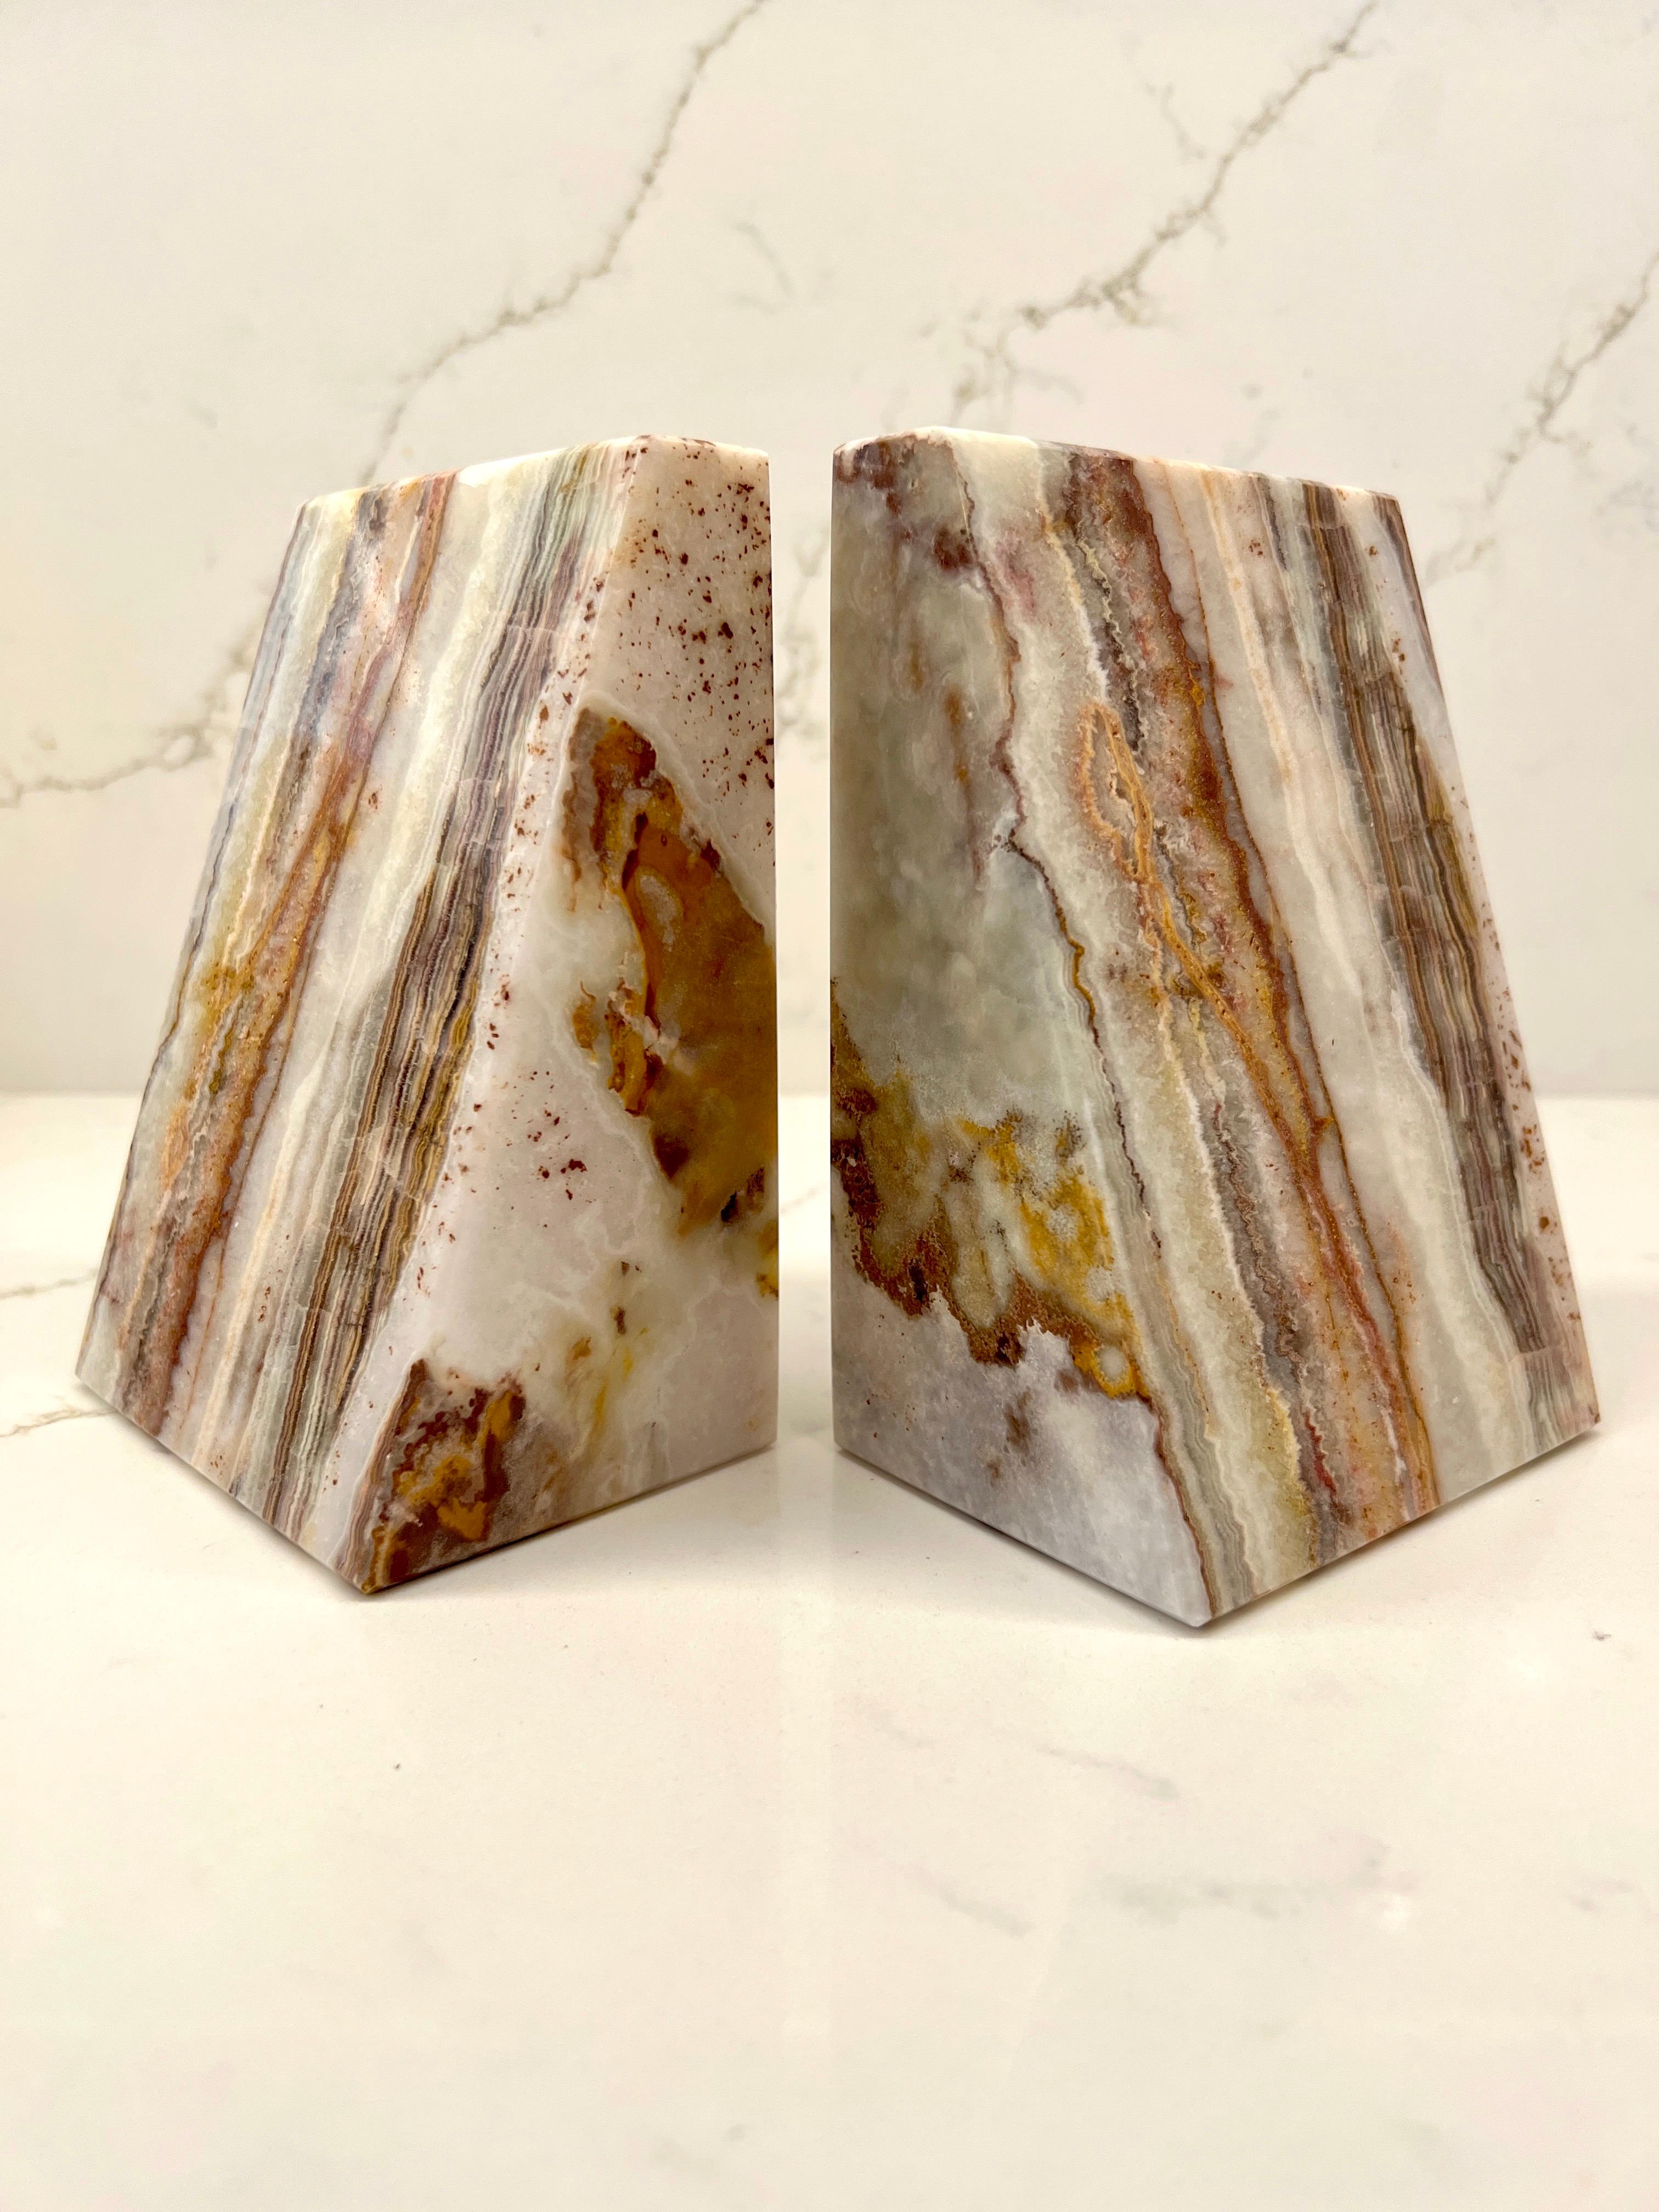 Handcrafted genuine onyx bookends with geometric design. Carved and polished natural striped onyx. Each piece is unique and features variegated colors in white, beige, tan, brown, and taupe. Makes a chic desk or bookcase accessory.